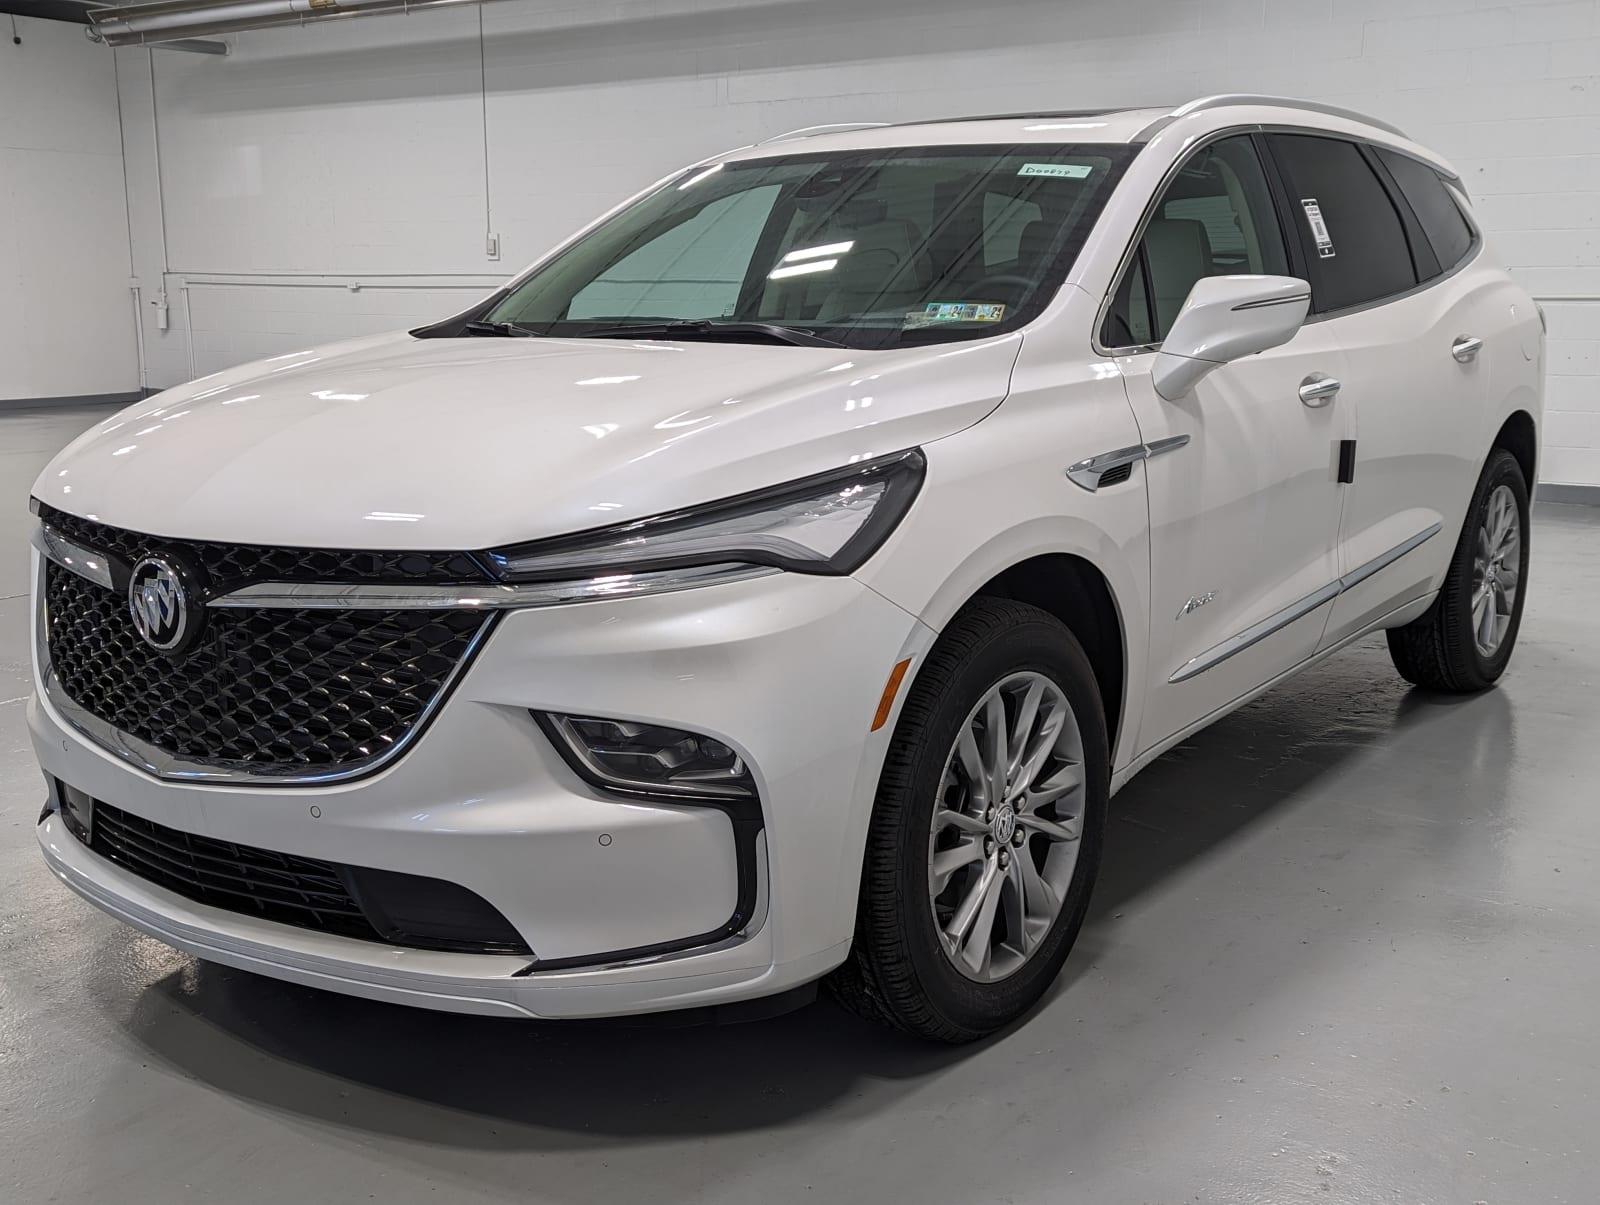 New 2023 Buick Enclave Avenir in WHITE FROST TRICOAT | Greensburg, PA |  #D00879